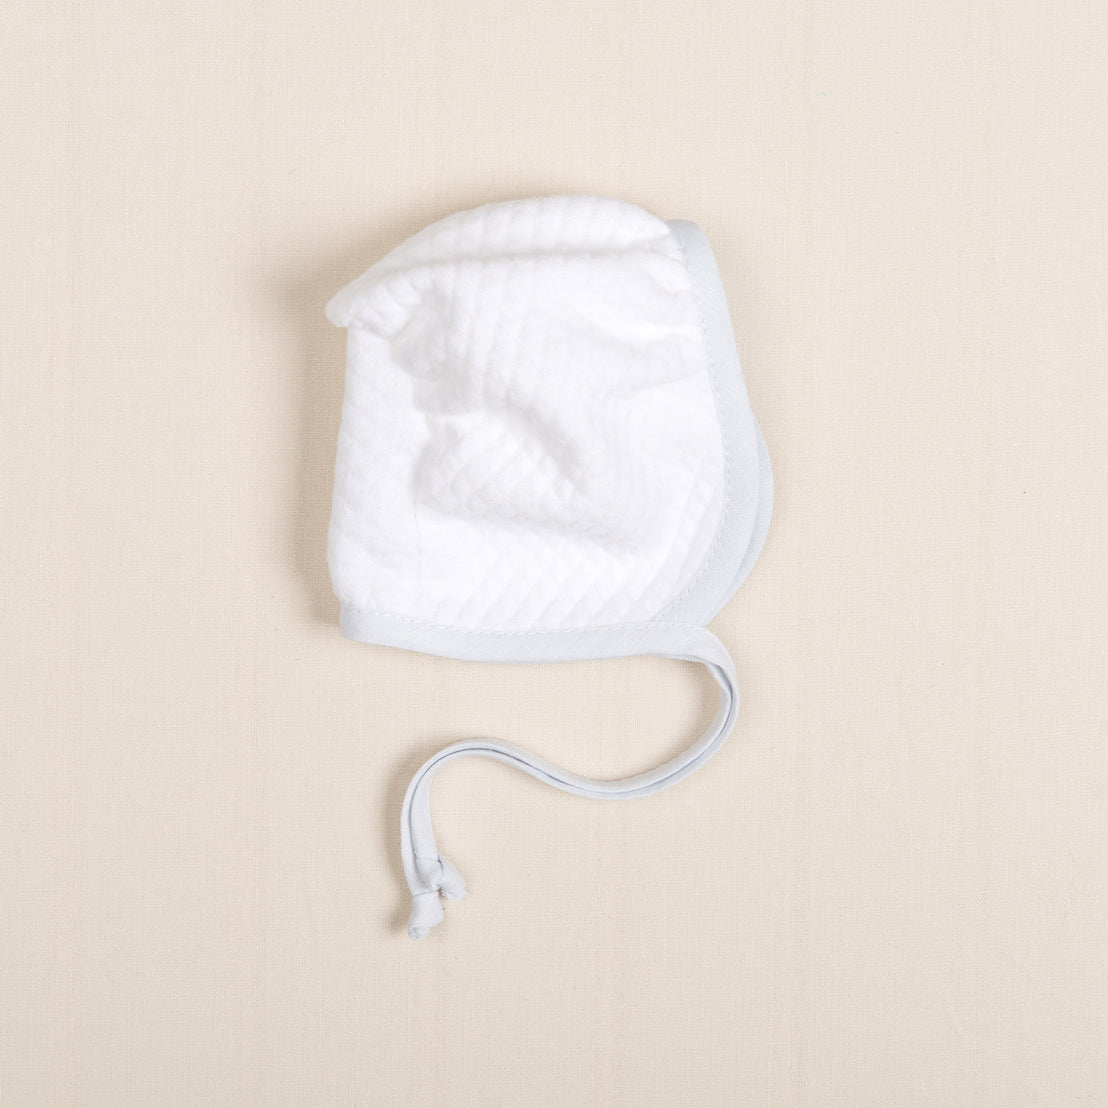 Flat lay photo of the Harrison Quilted Bonnet made with soft quilted cotton in white with a light blue trim linen. Blue linen ties allow for tying under the chin